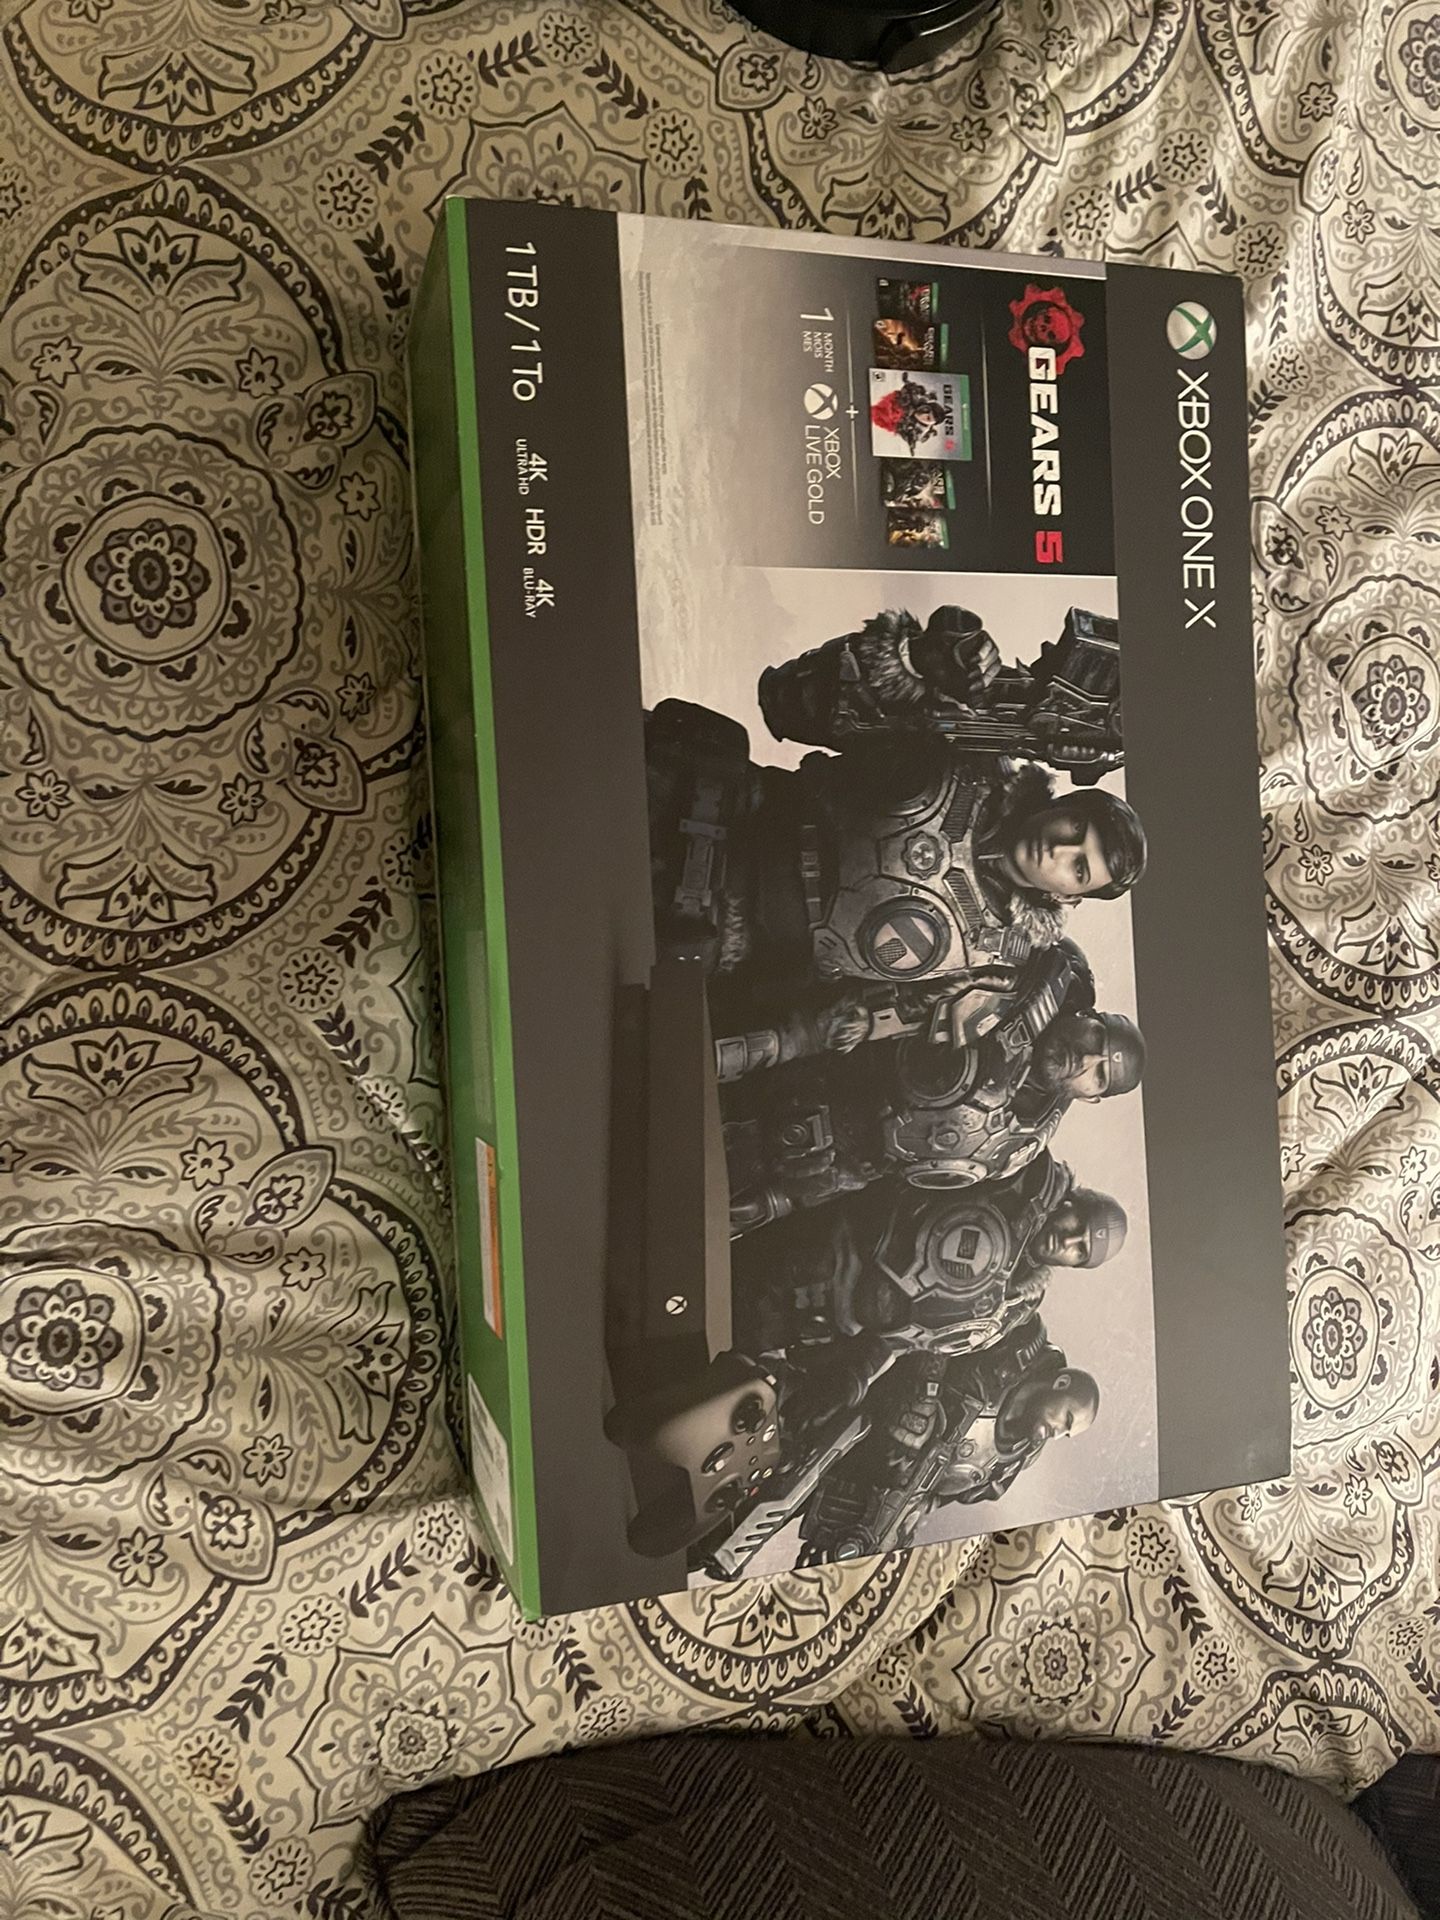 Xbox One X w/ 2 Controllers and Wireless headset (Gears Of War Series Included)